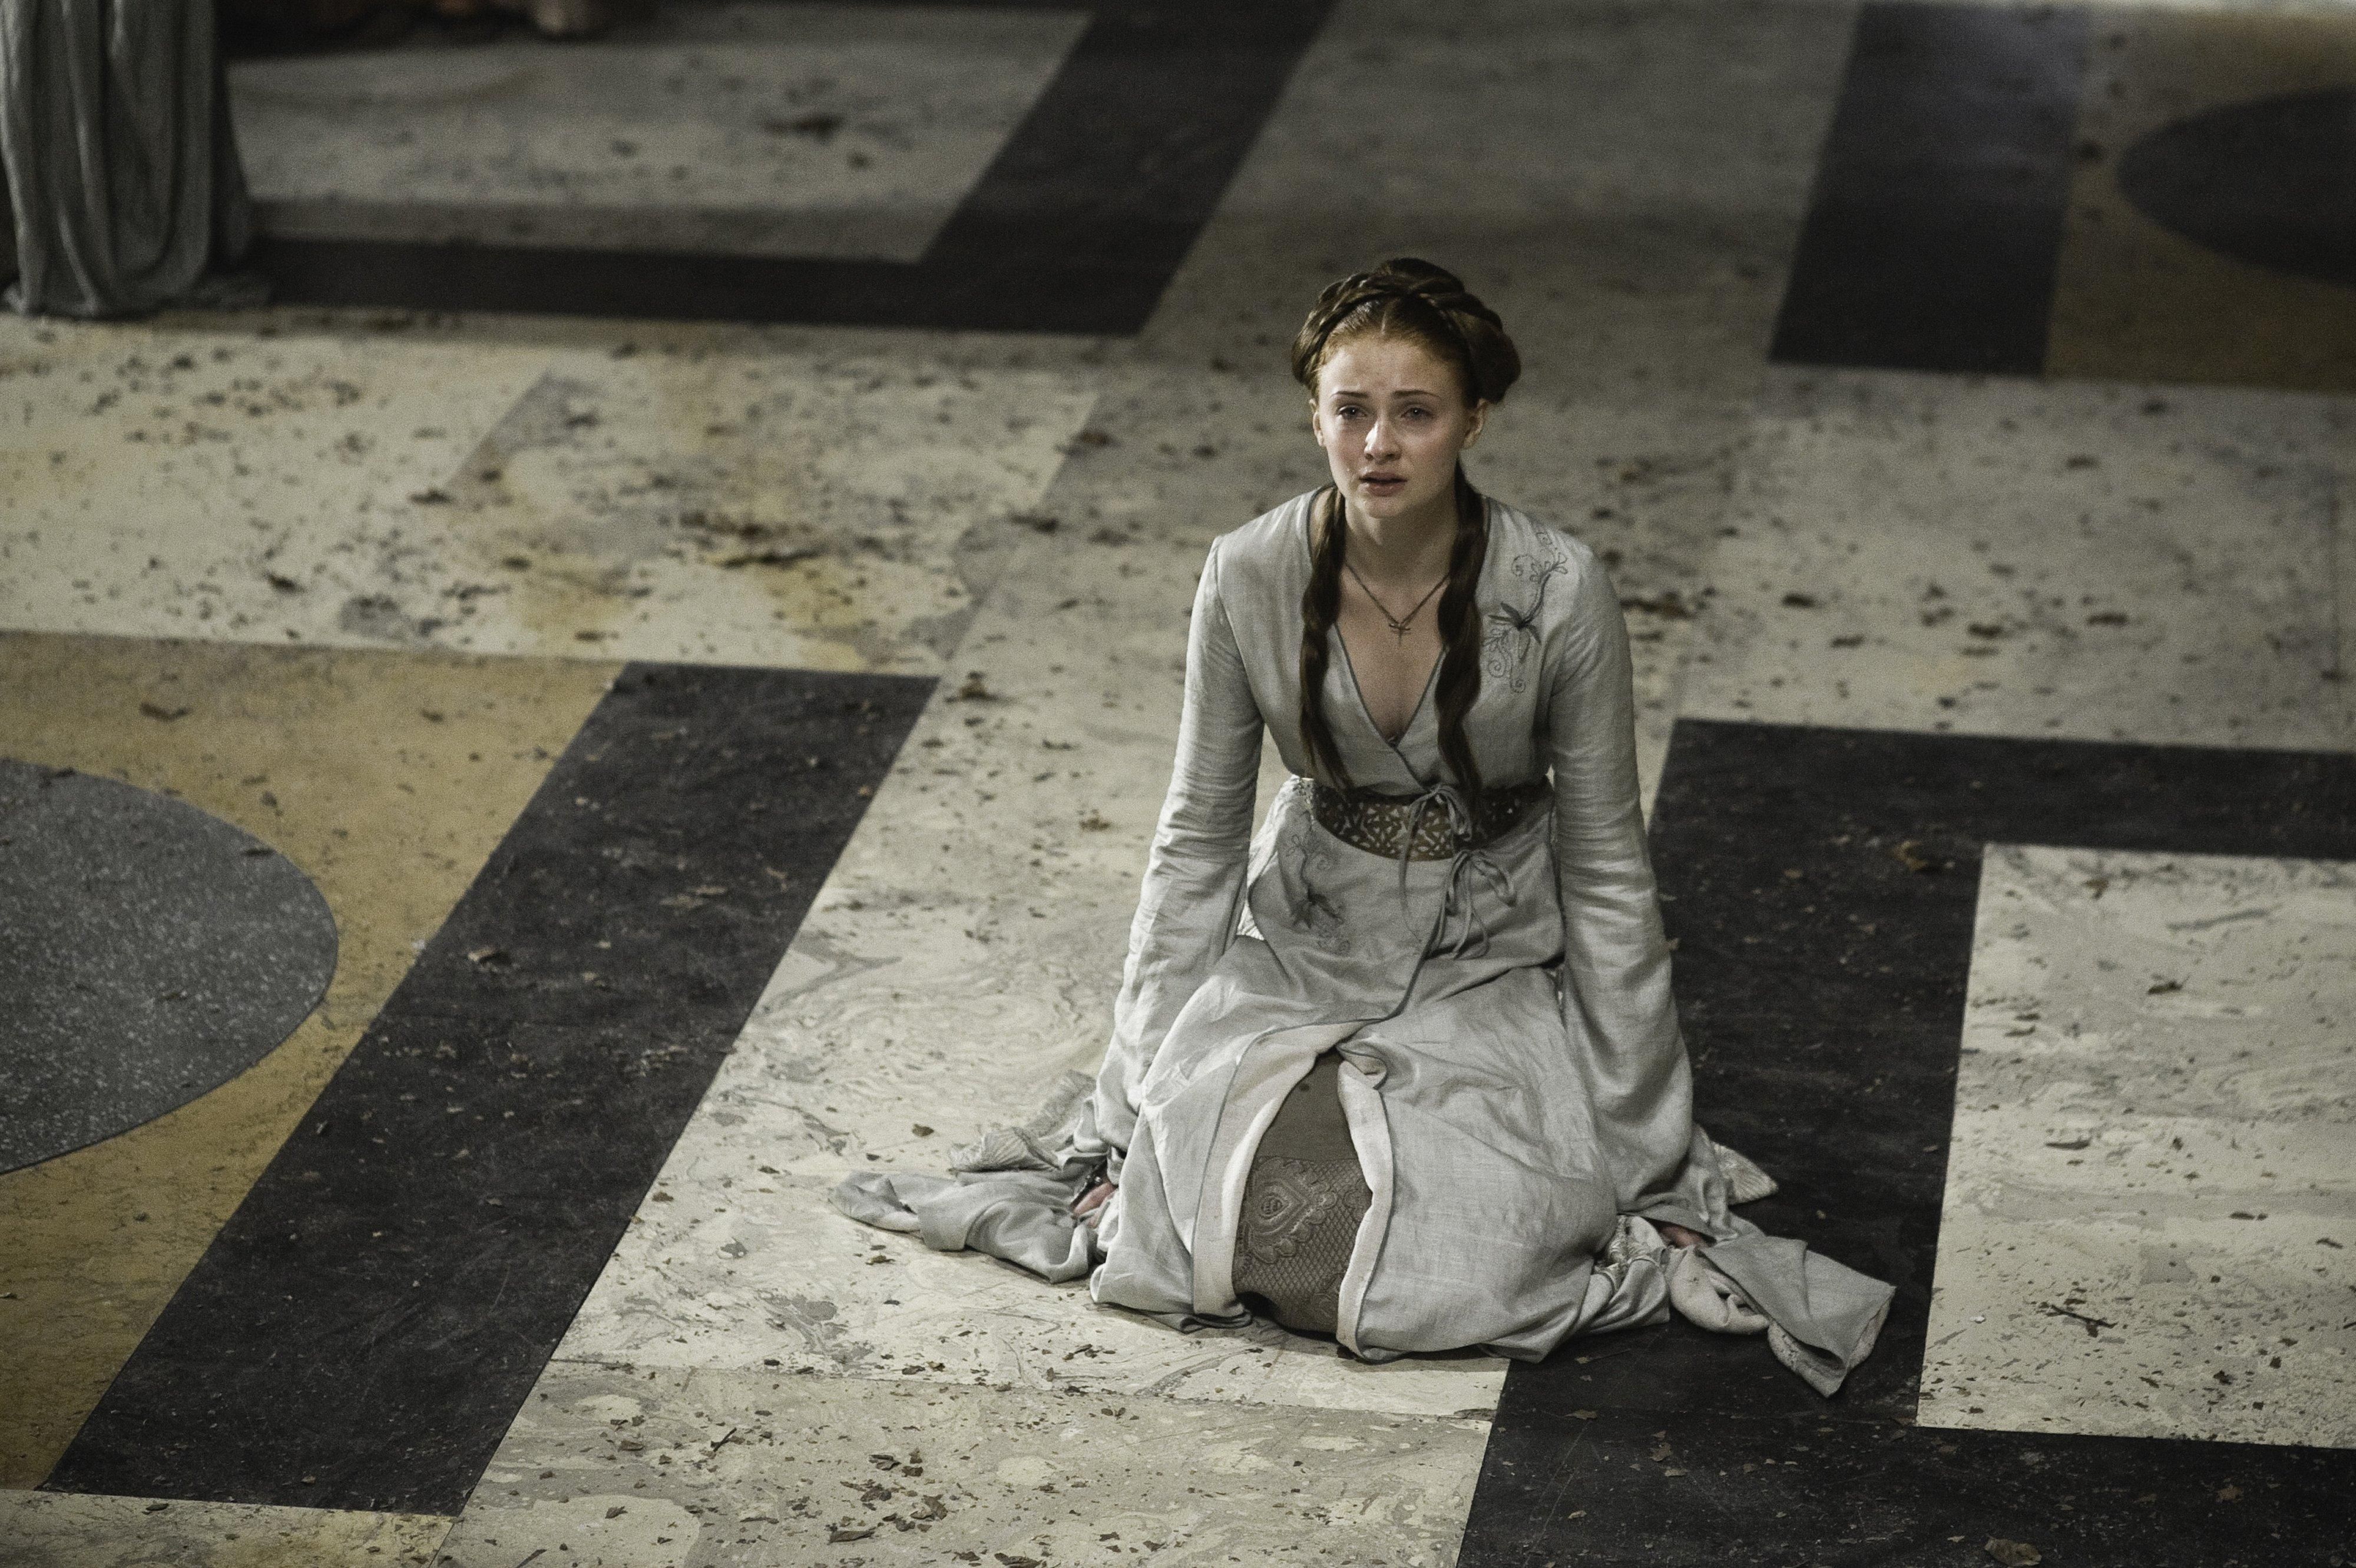 Game Of Thrones 5 Times We Felt Bad For Sansa Stark (And 5 Times We Hated Her)